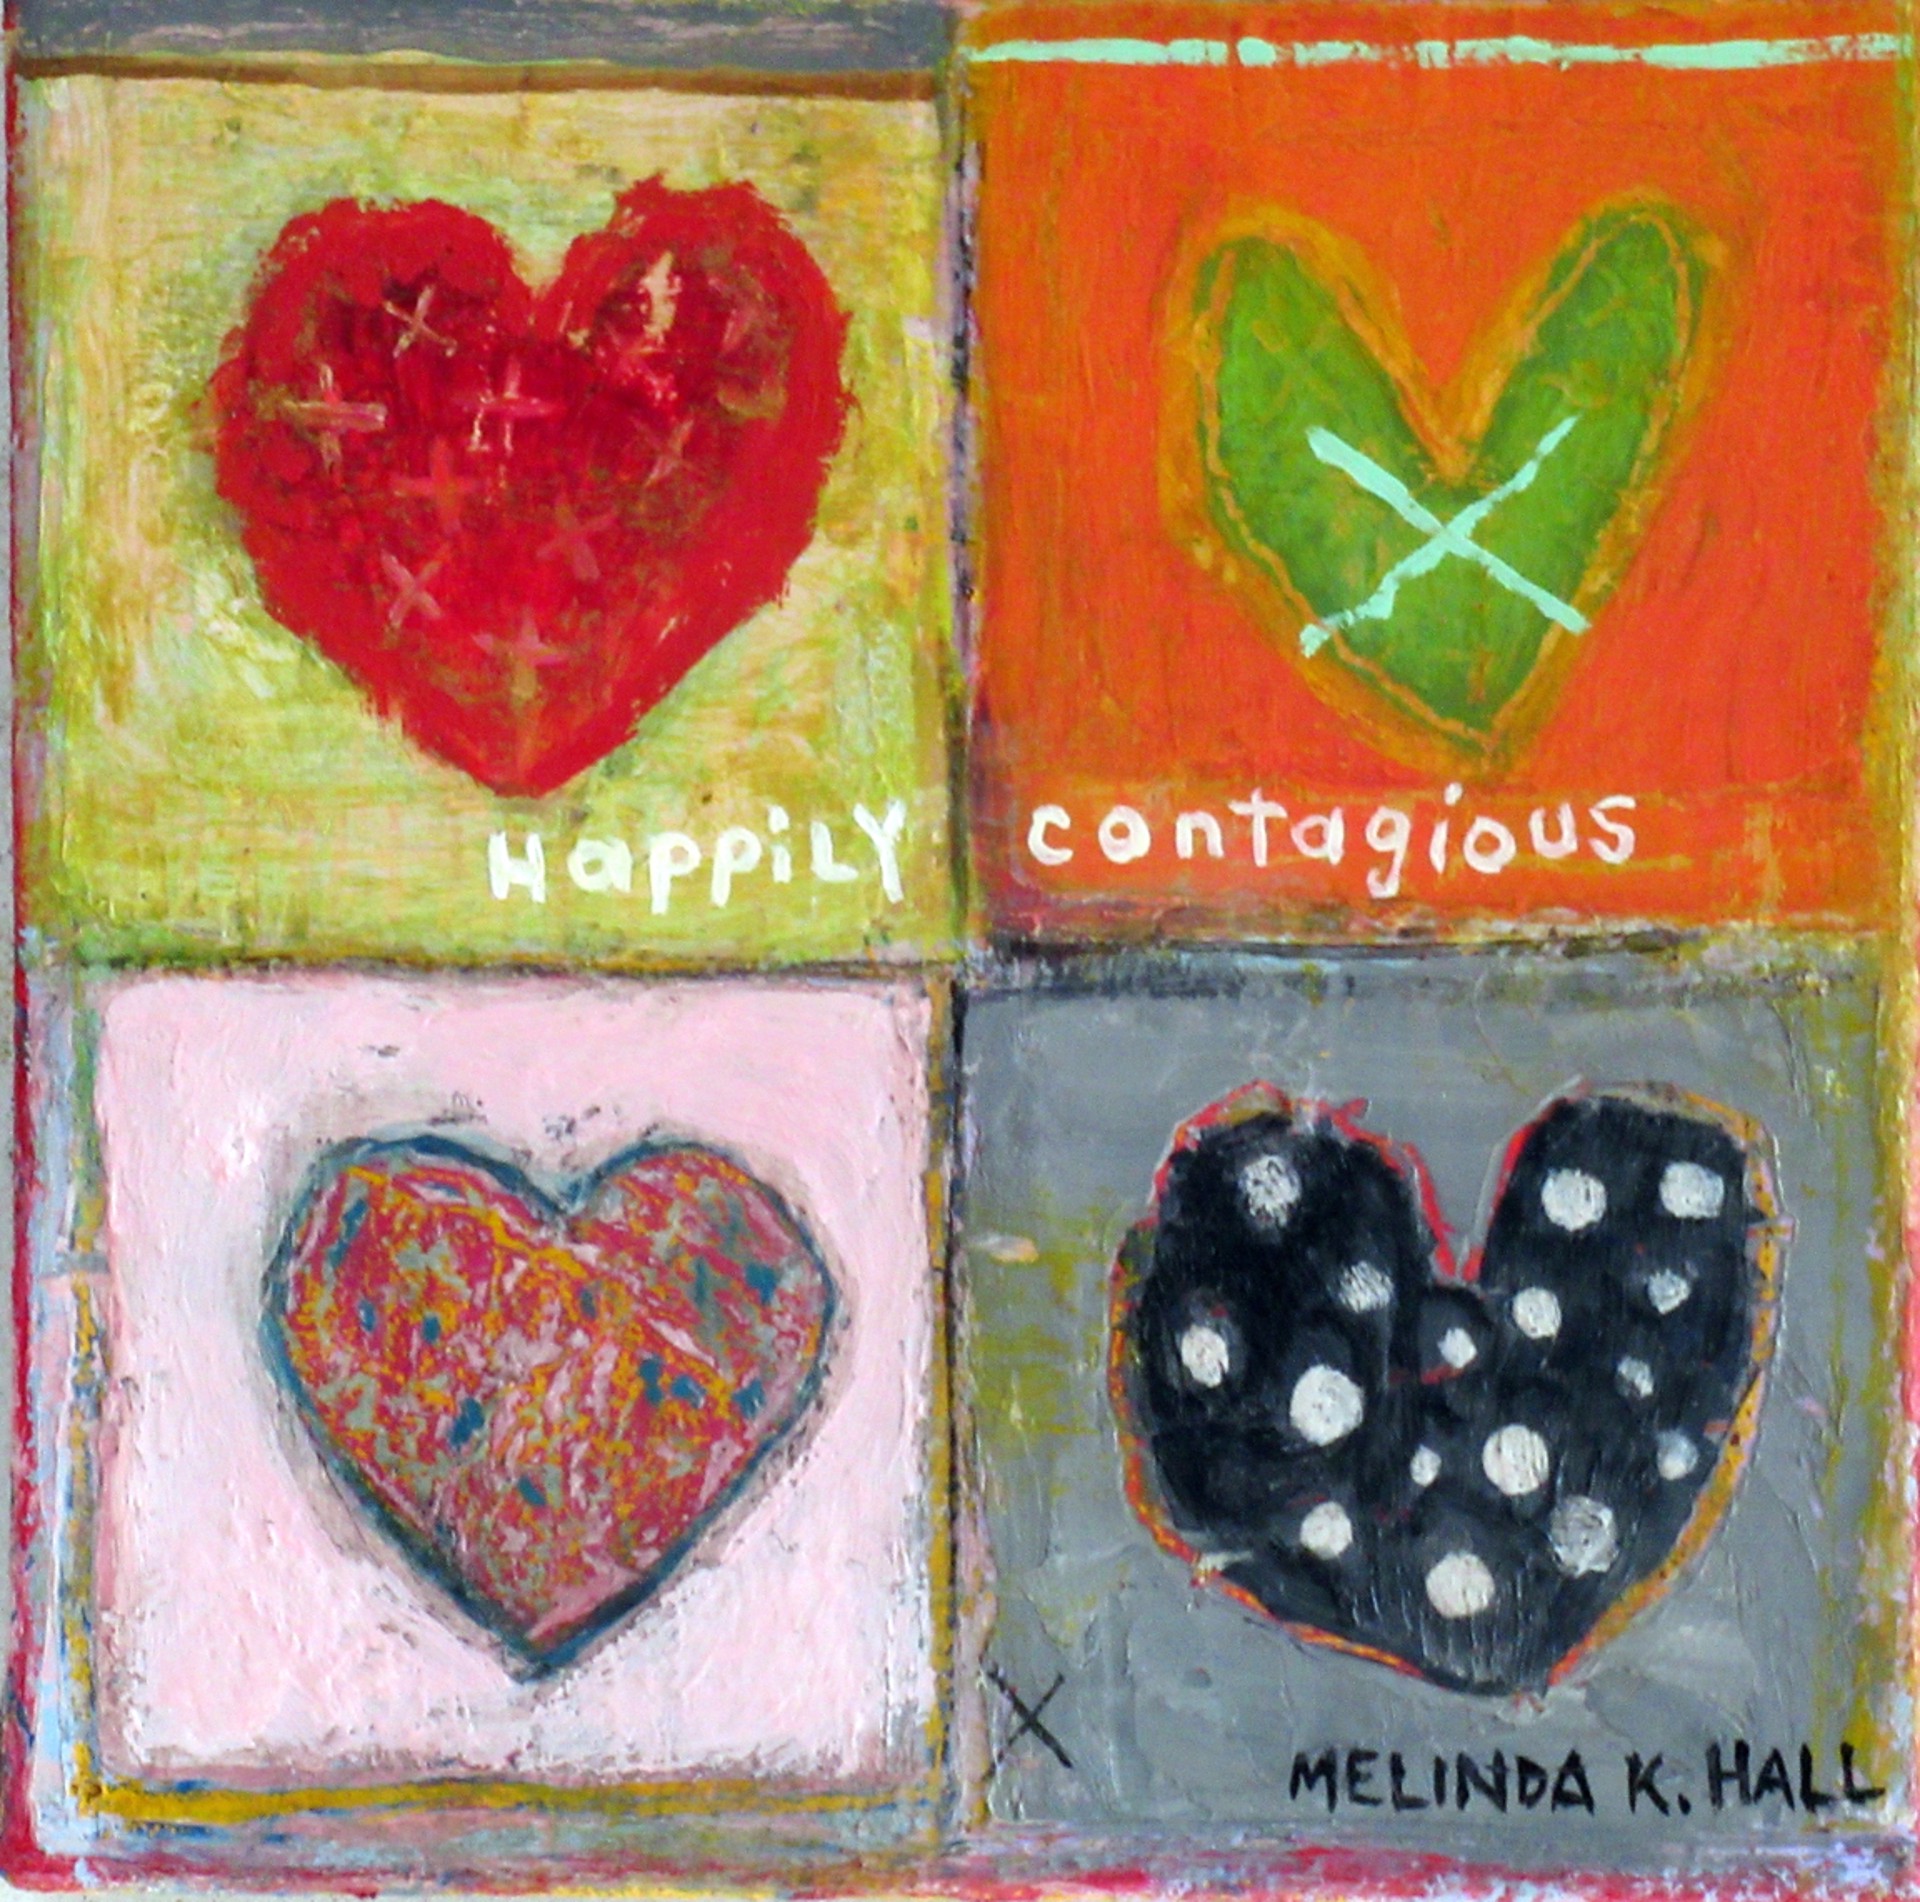 Happily Contagious by Melinda K. Hall